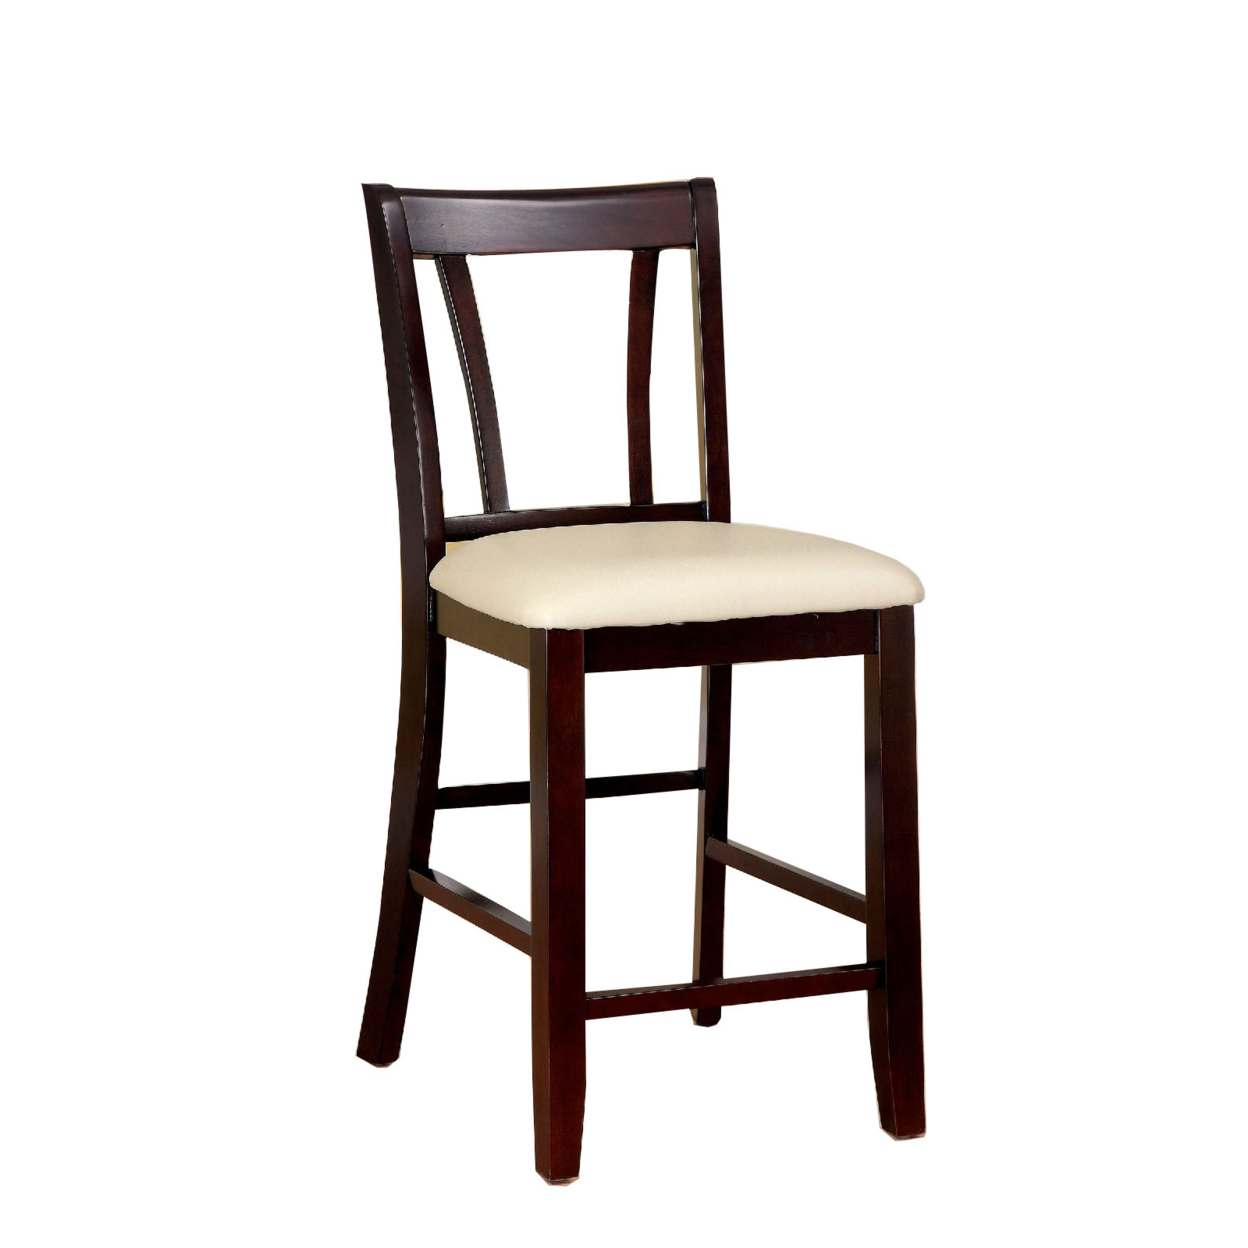 Wooden Counter Height Chair With Padded Seat And Back, Pack Of 2, Brown & Ivory- Saltoro Sherpi